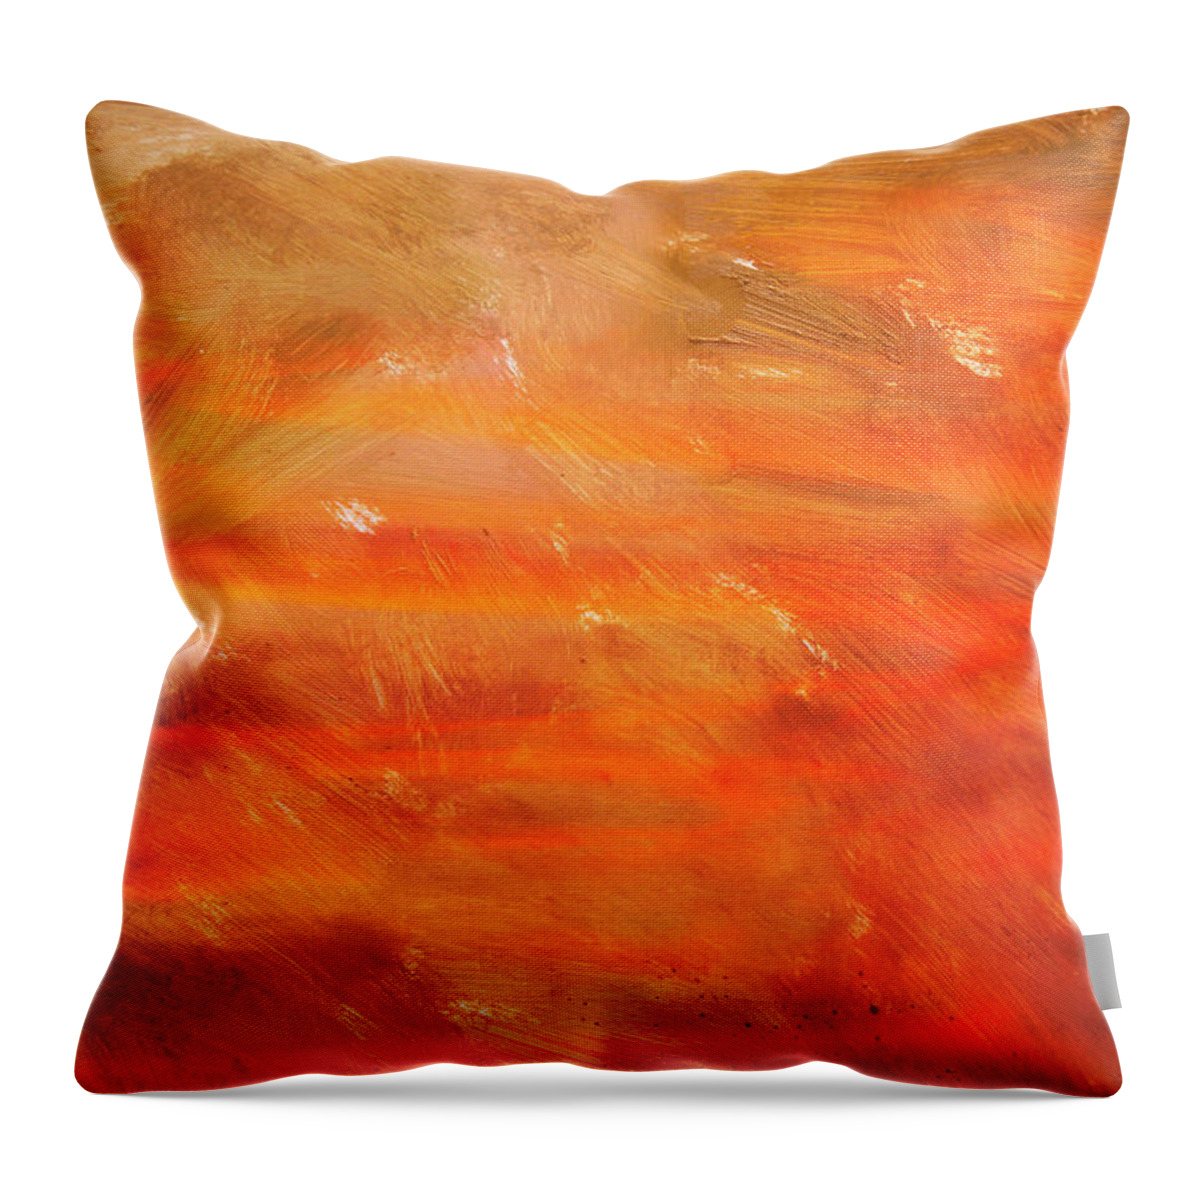 A Digital Abstract Using A Photograph Of A Sunset As The Base For The Work. Throw Pillow featuring the digital art Chaos Theory by Linda Lee Hall